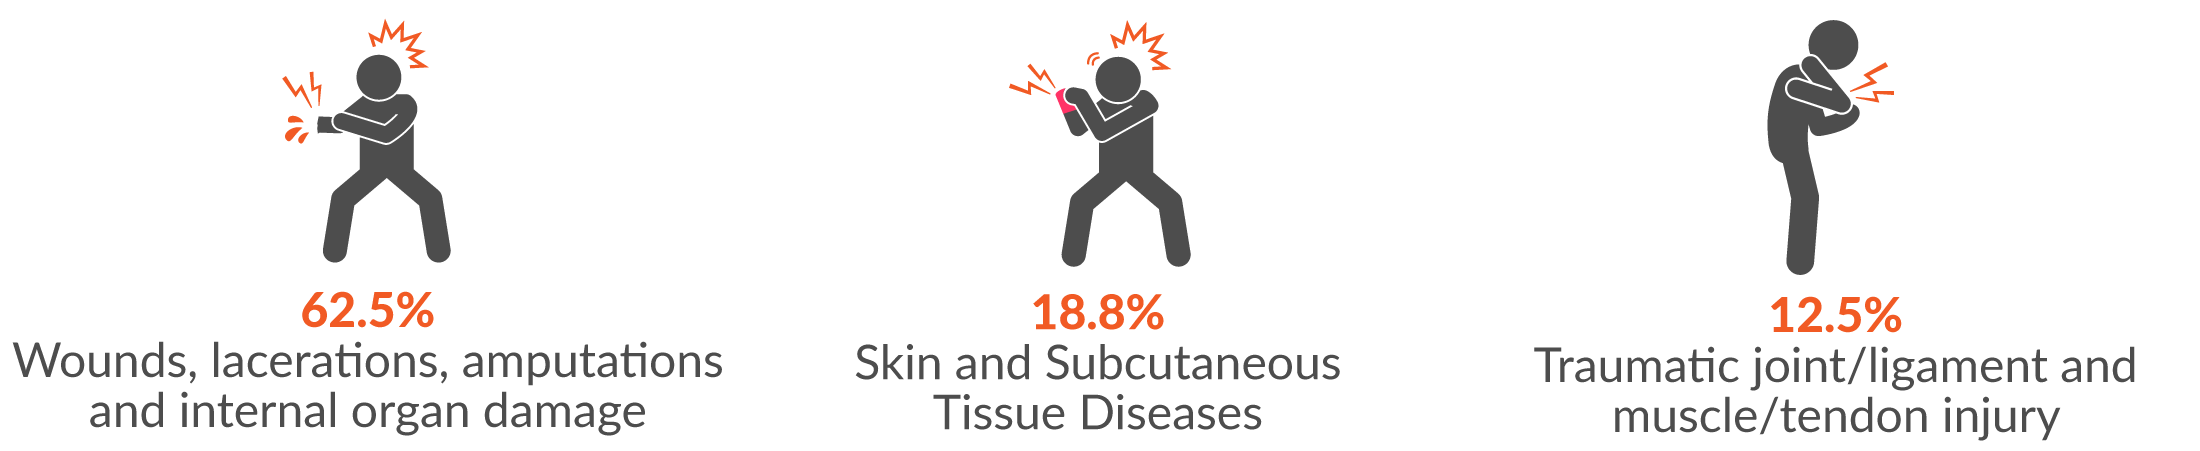 This infographic shows the main three injury groups resulting from hitting objects with a part of the body were 62.5% wounds, lacerations, amputations and internal organ damage; 18.8% skin and subcutaneous tissue diseases; and and 12.5% traumatic joint/ligament and muscle/tendon injury.